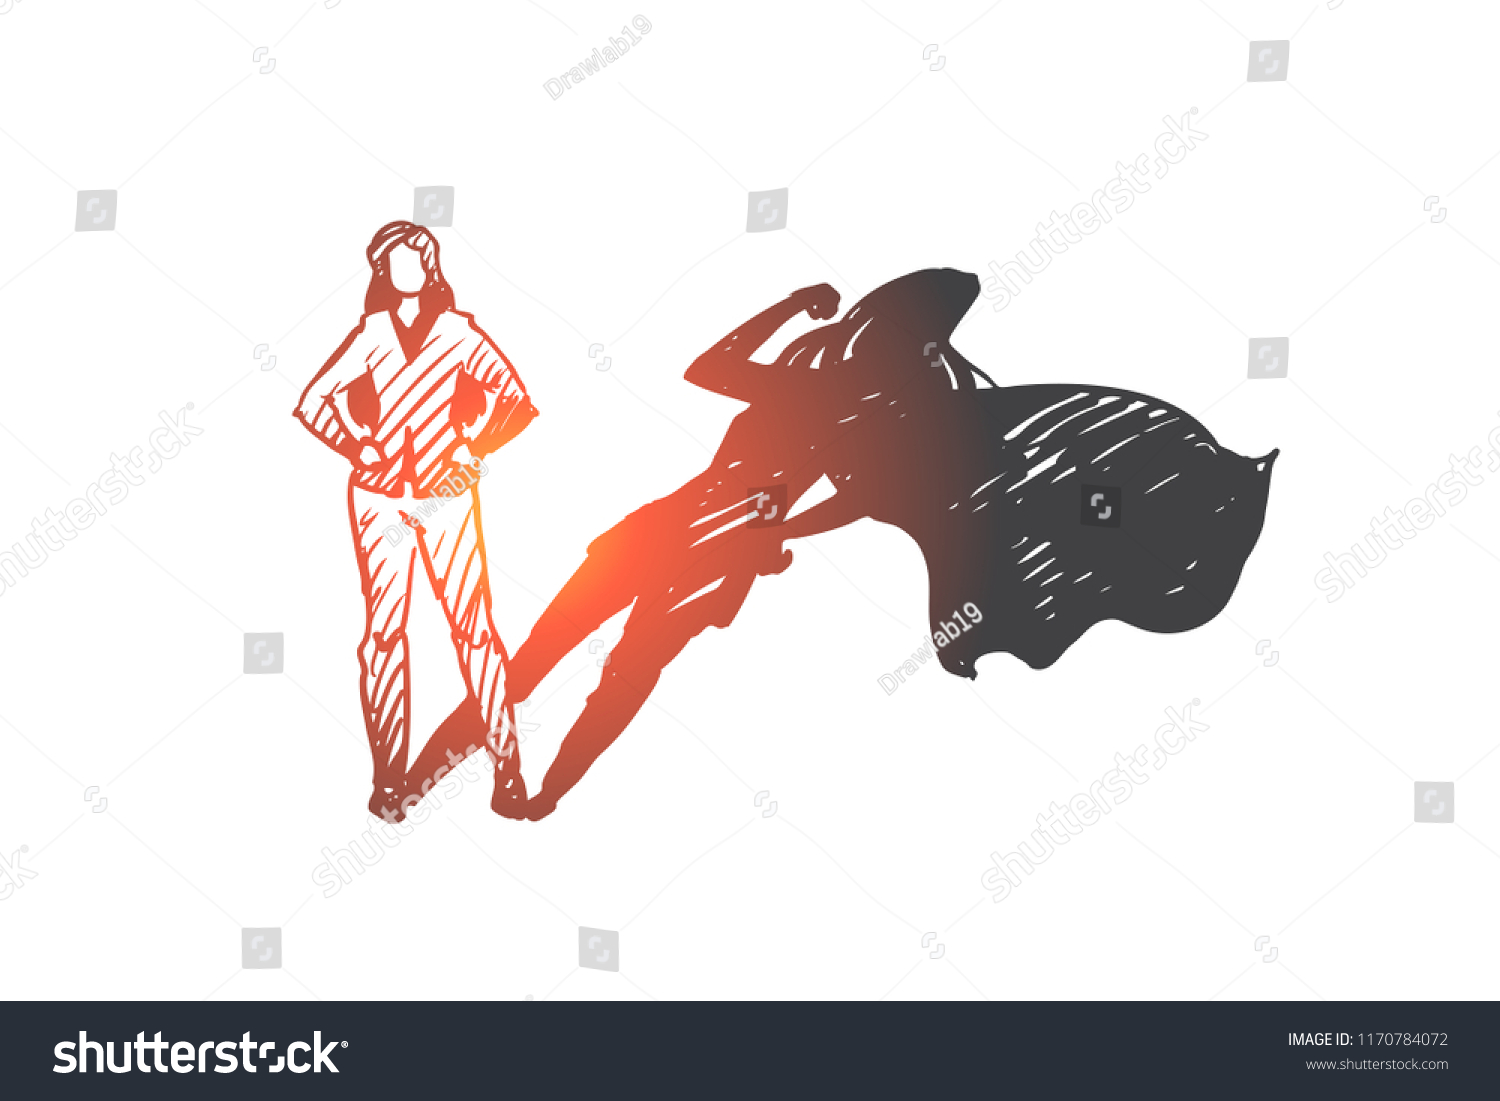 self-esteem, businessman, potential concept. Hand drawn woman with high potential and hidden talent concept sketch. Isolated vector illustration. #1170784072